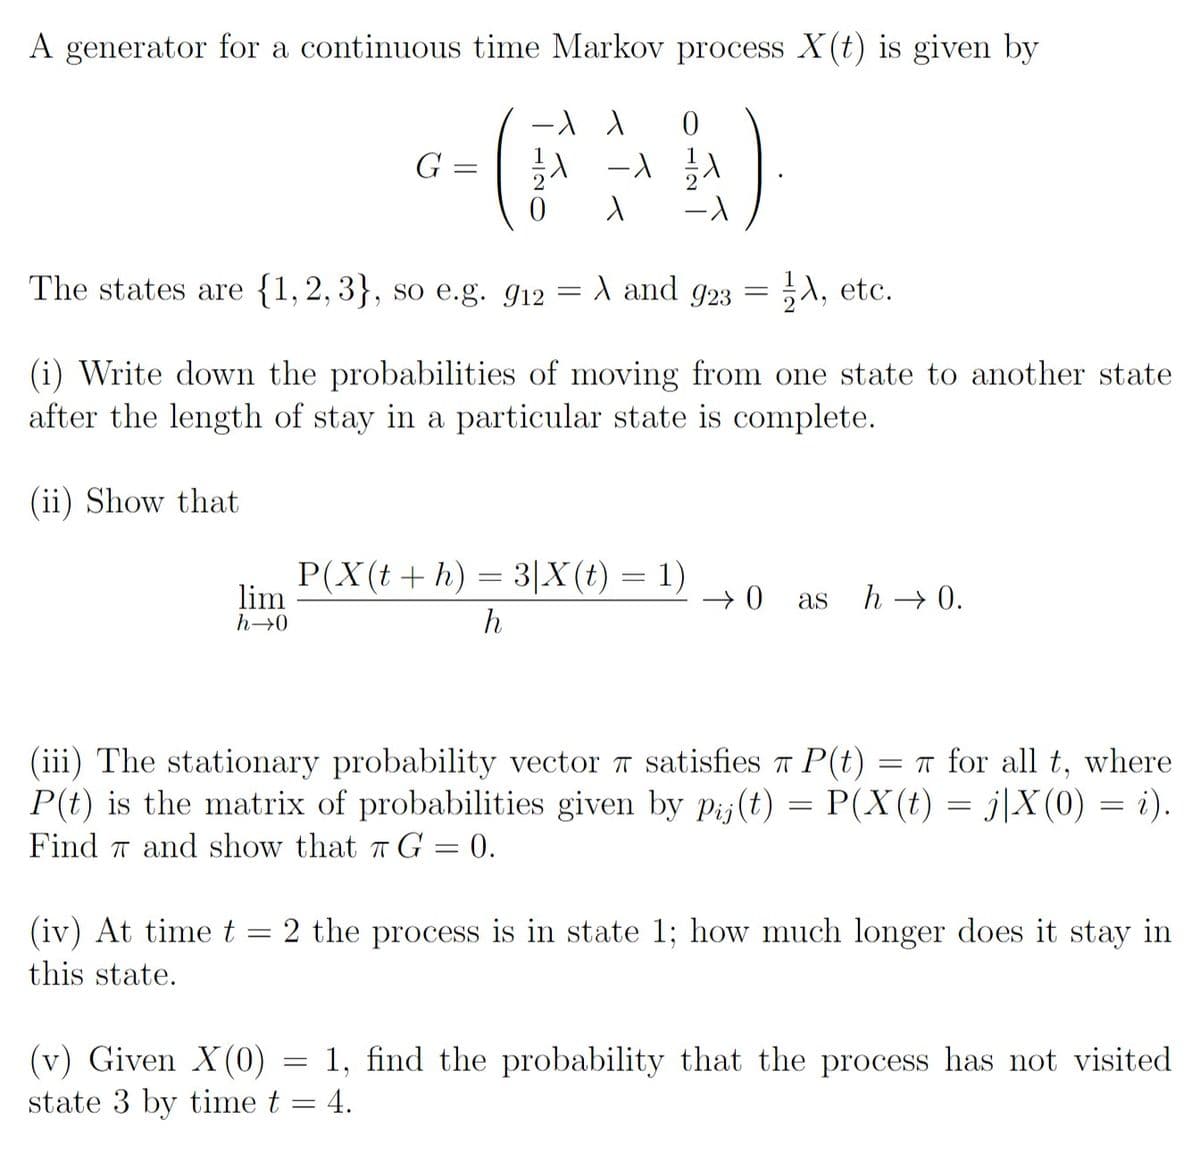 A generator for a continuous time Markov process X(t) is given by
G
The states are {1, 2, 3}, so e.g. g12 = A and g23 = A, etc.
(i) Write down the probabilities of moving from one state to another state
after the length of stay in a particular state is complete.
(ii) Show that
P(X(t + h) = 3|X(t) = 1)
lim
h→0
as
h → 0.
h
(iii) The stationary probability vector T satisfies T P(t)
P(t) is the matrix of probabilities given by pij(t) = P(X(t) = j|X (0) = i).
Find 7 and show that a G = 0.
= T for all t, where
(iv) At time t = 2 the process is in state 1; how much longer does it stay in
this state.
(v) Given X(0) = 1, find the probability that the process has not visited
state 3 by time t = 4.
